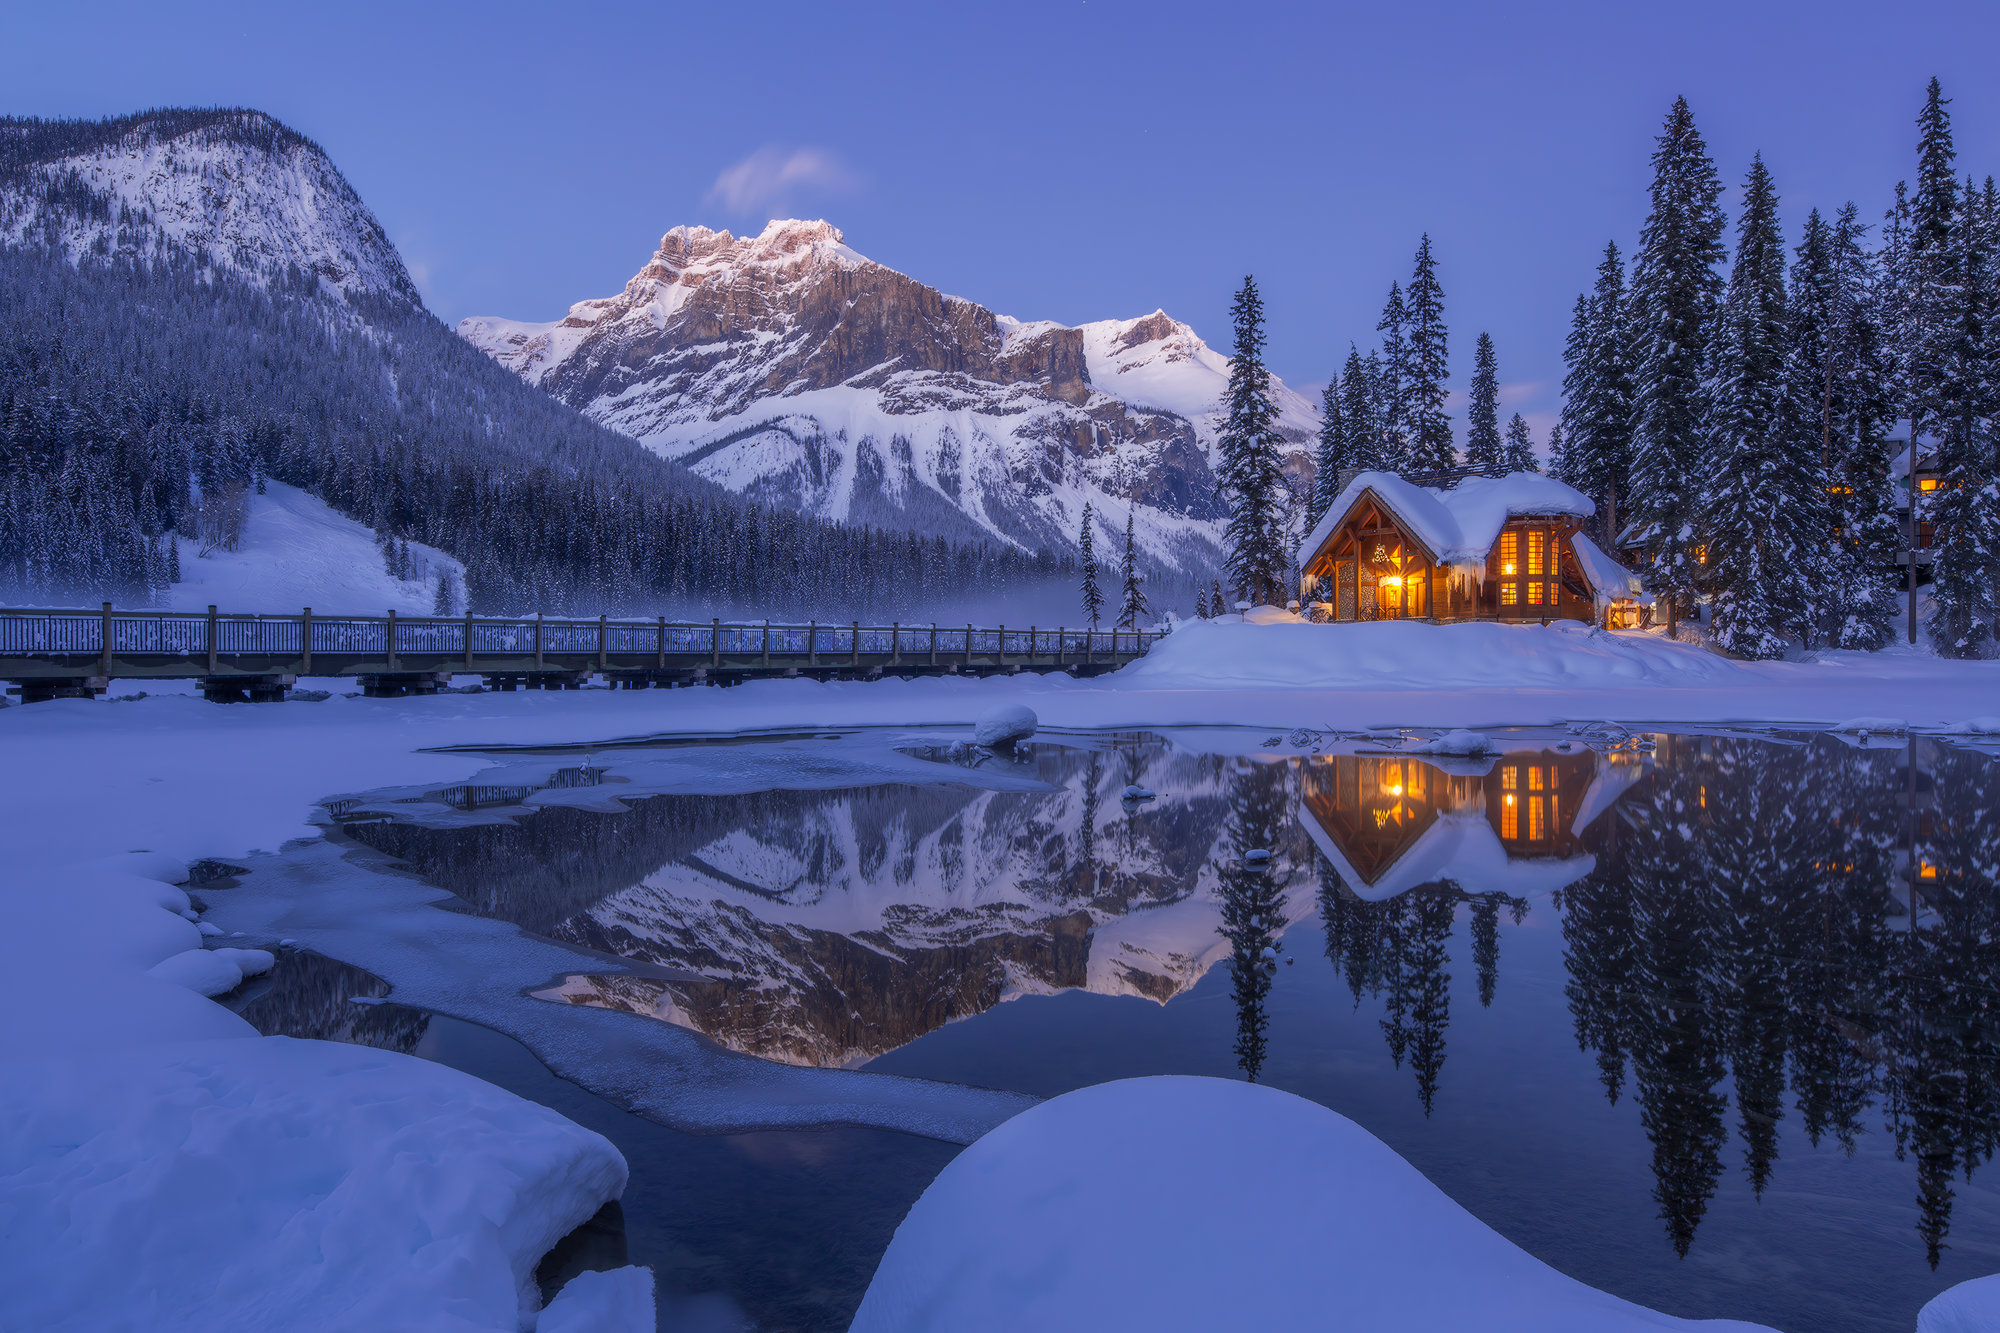 Mountains Snow Water Clear Sky House Lights Trees Reflection Emerald Lake Yoho National Park Canada  2000x1333